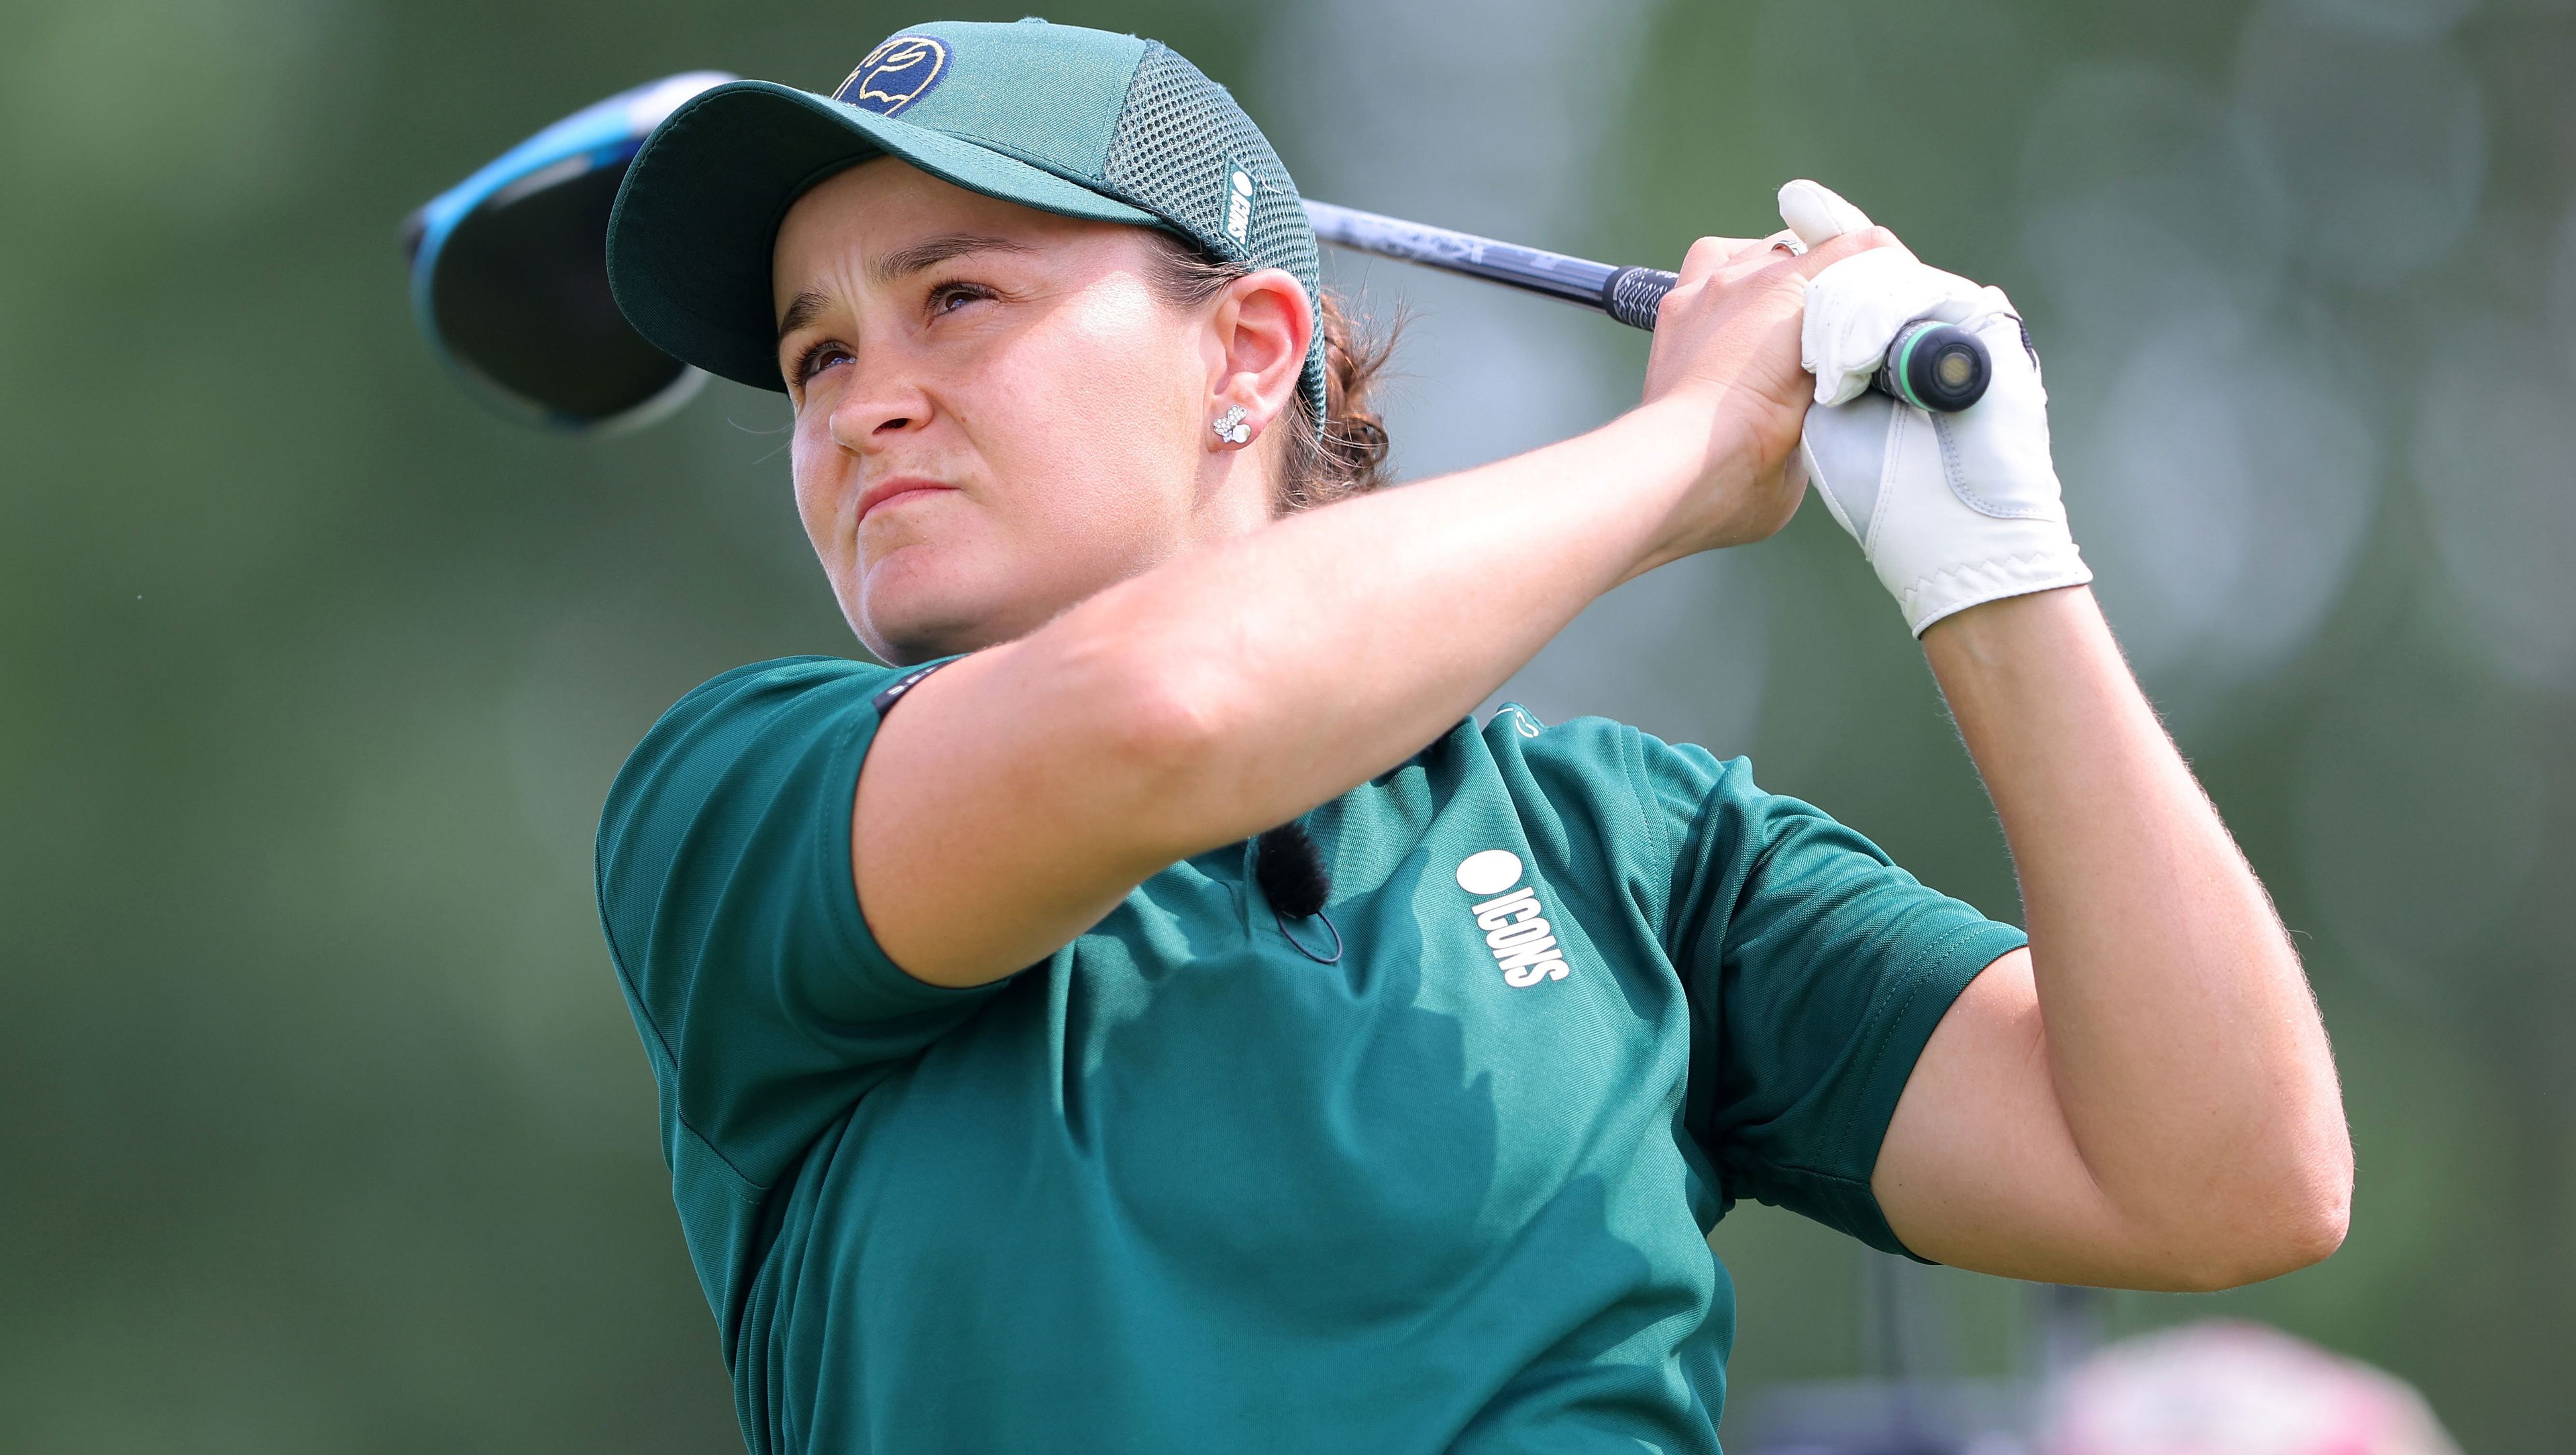 Ash Barty clubs a drive as she plays in a golf tournament.